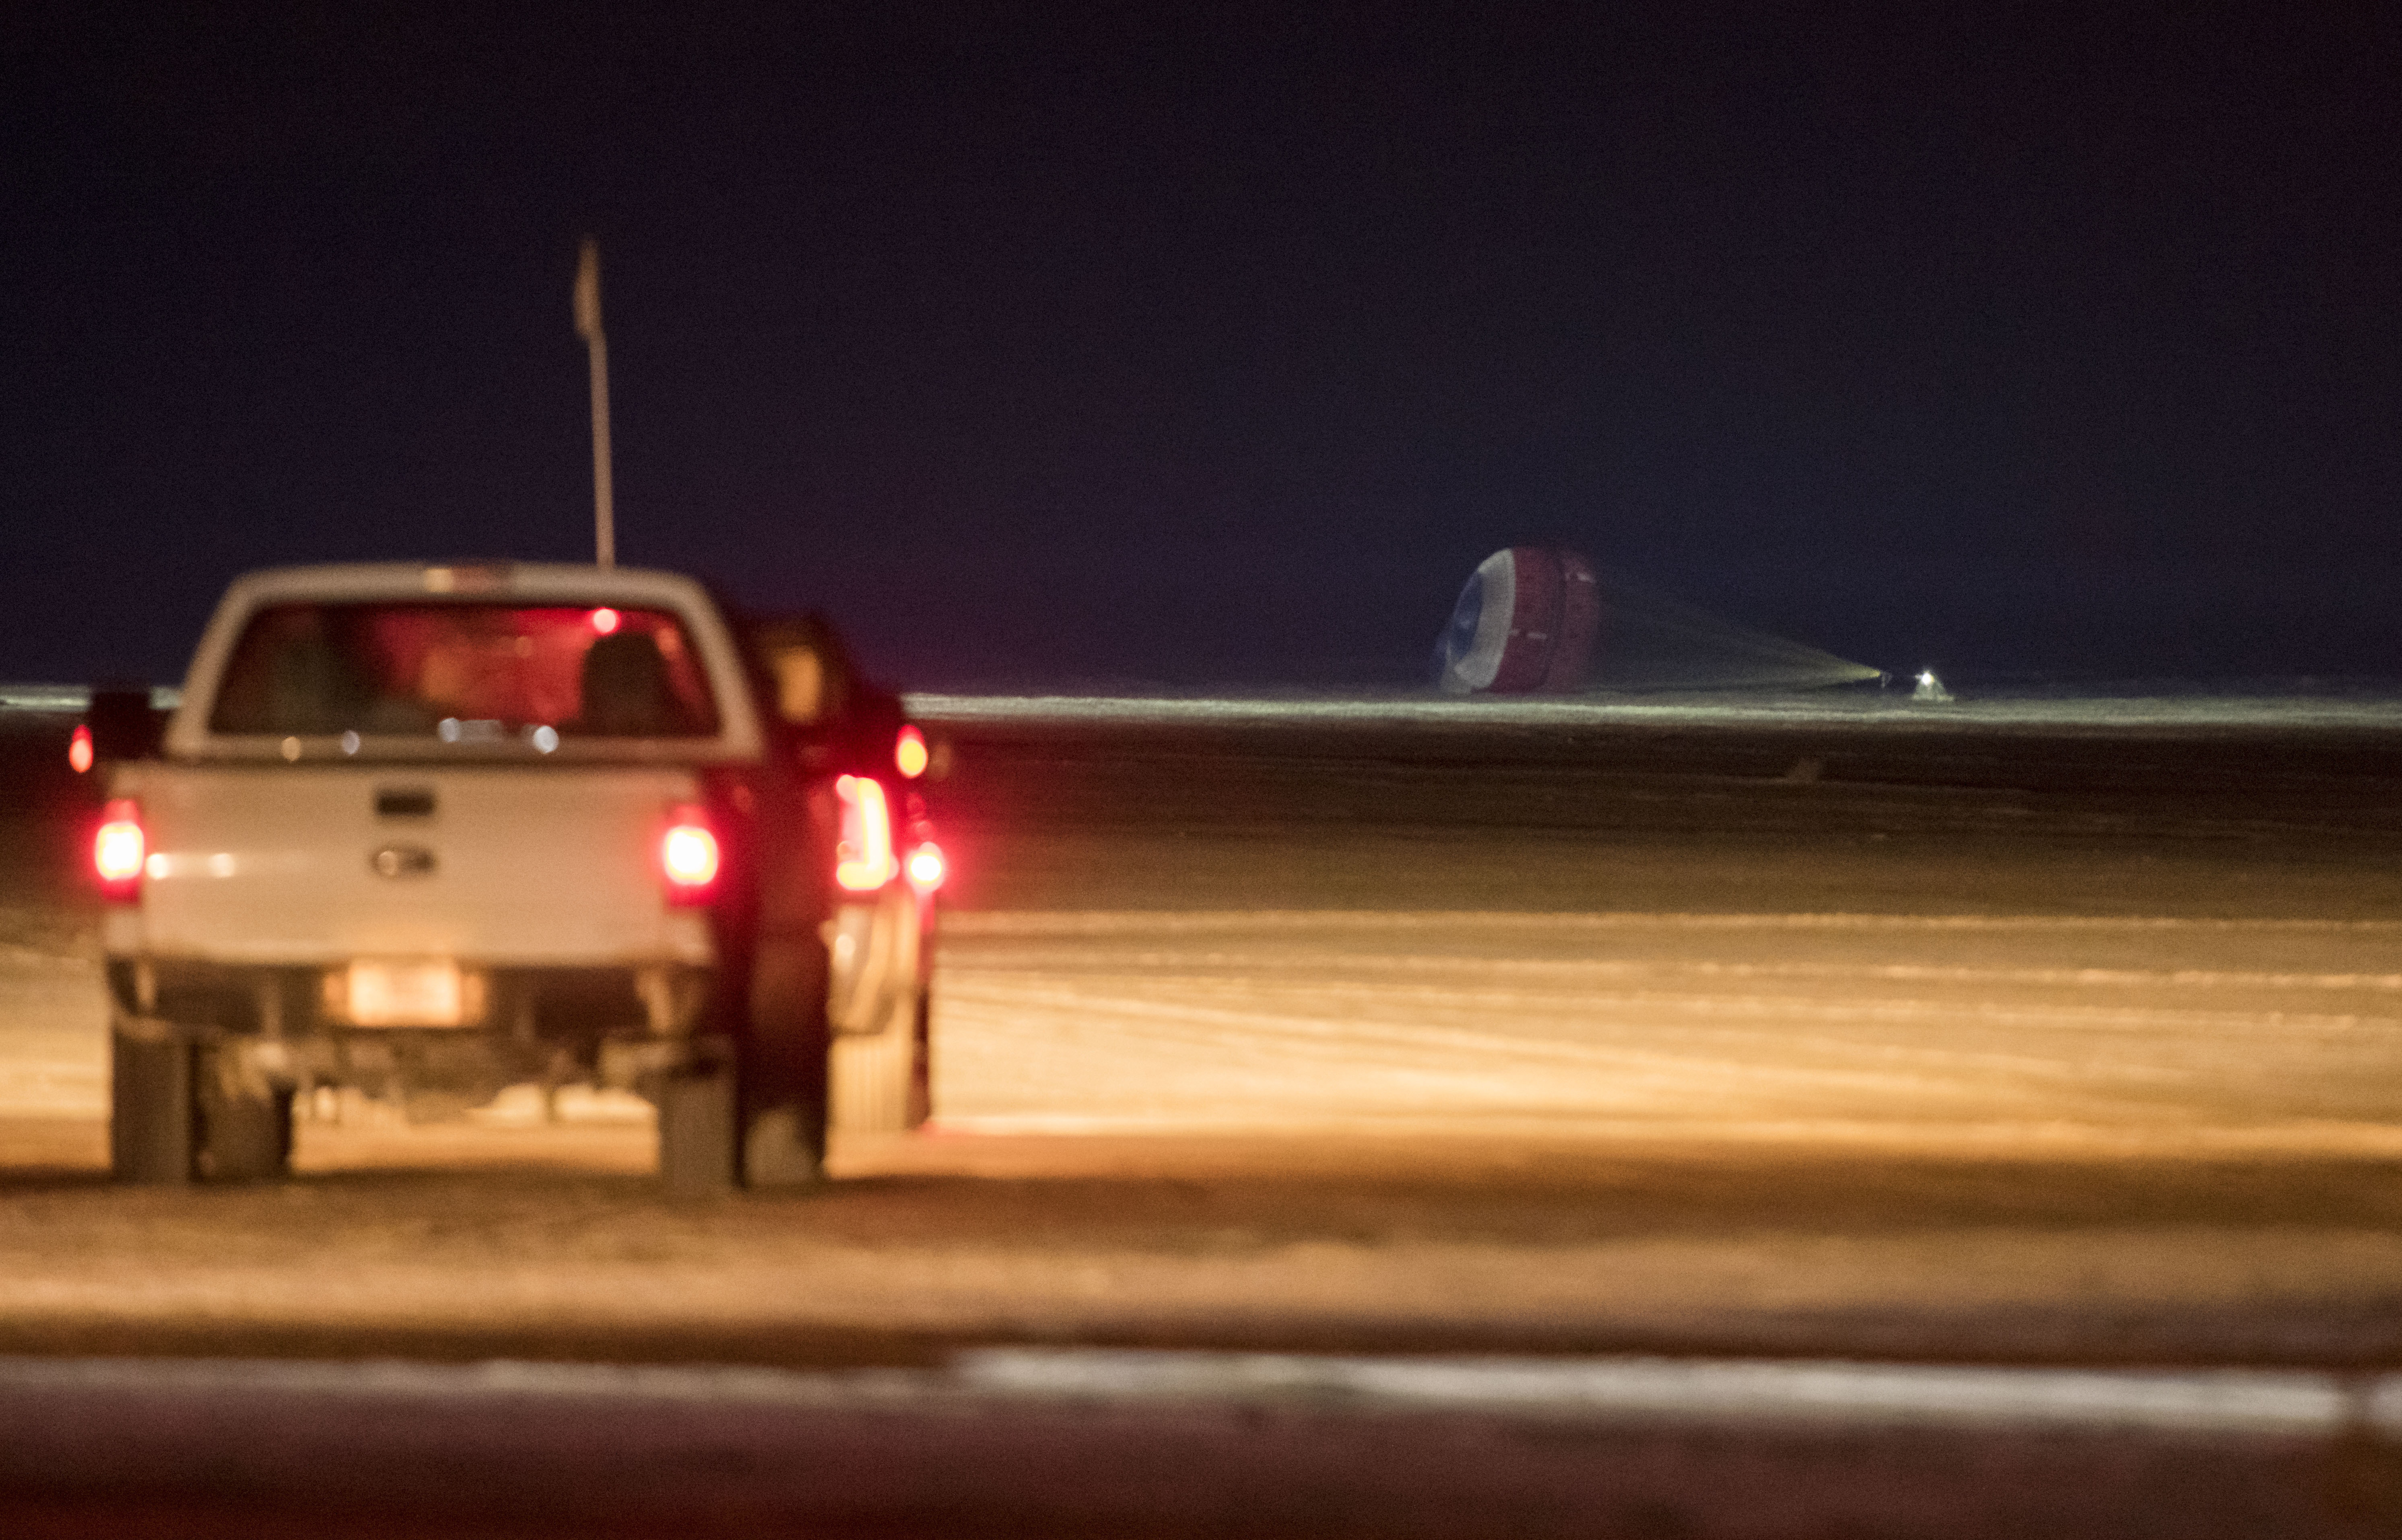 The Boeing CST-100 Starliner spacecraft lands in White Sands, New Mexico, on Sunday.